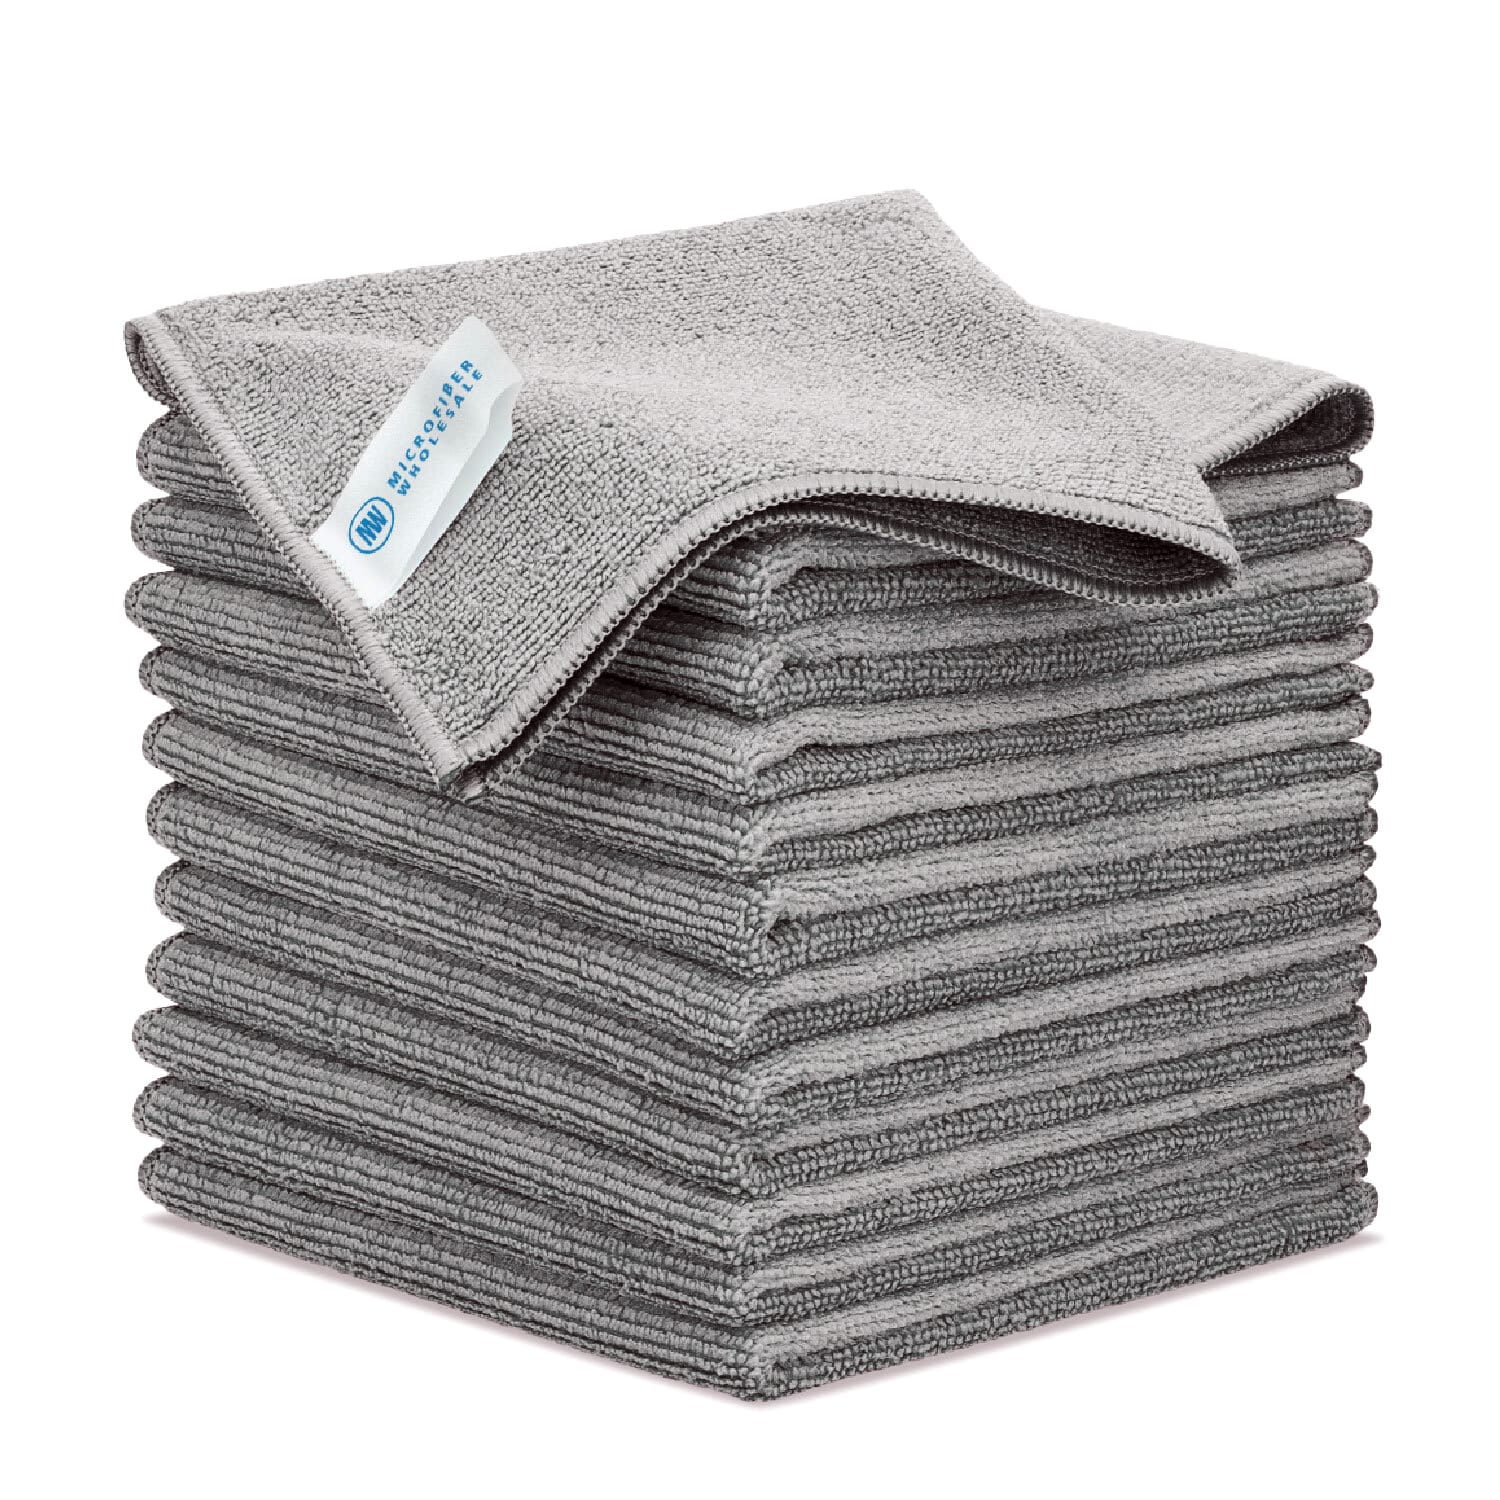  ForPro Cozy Cloths Microfiber Towels, Ultra-Soft and Absorbent  Cleaning Cloths, Assorted Colors, 50-Count : Health & Household